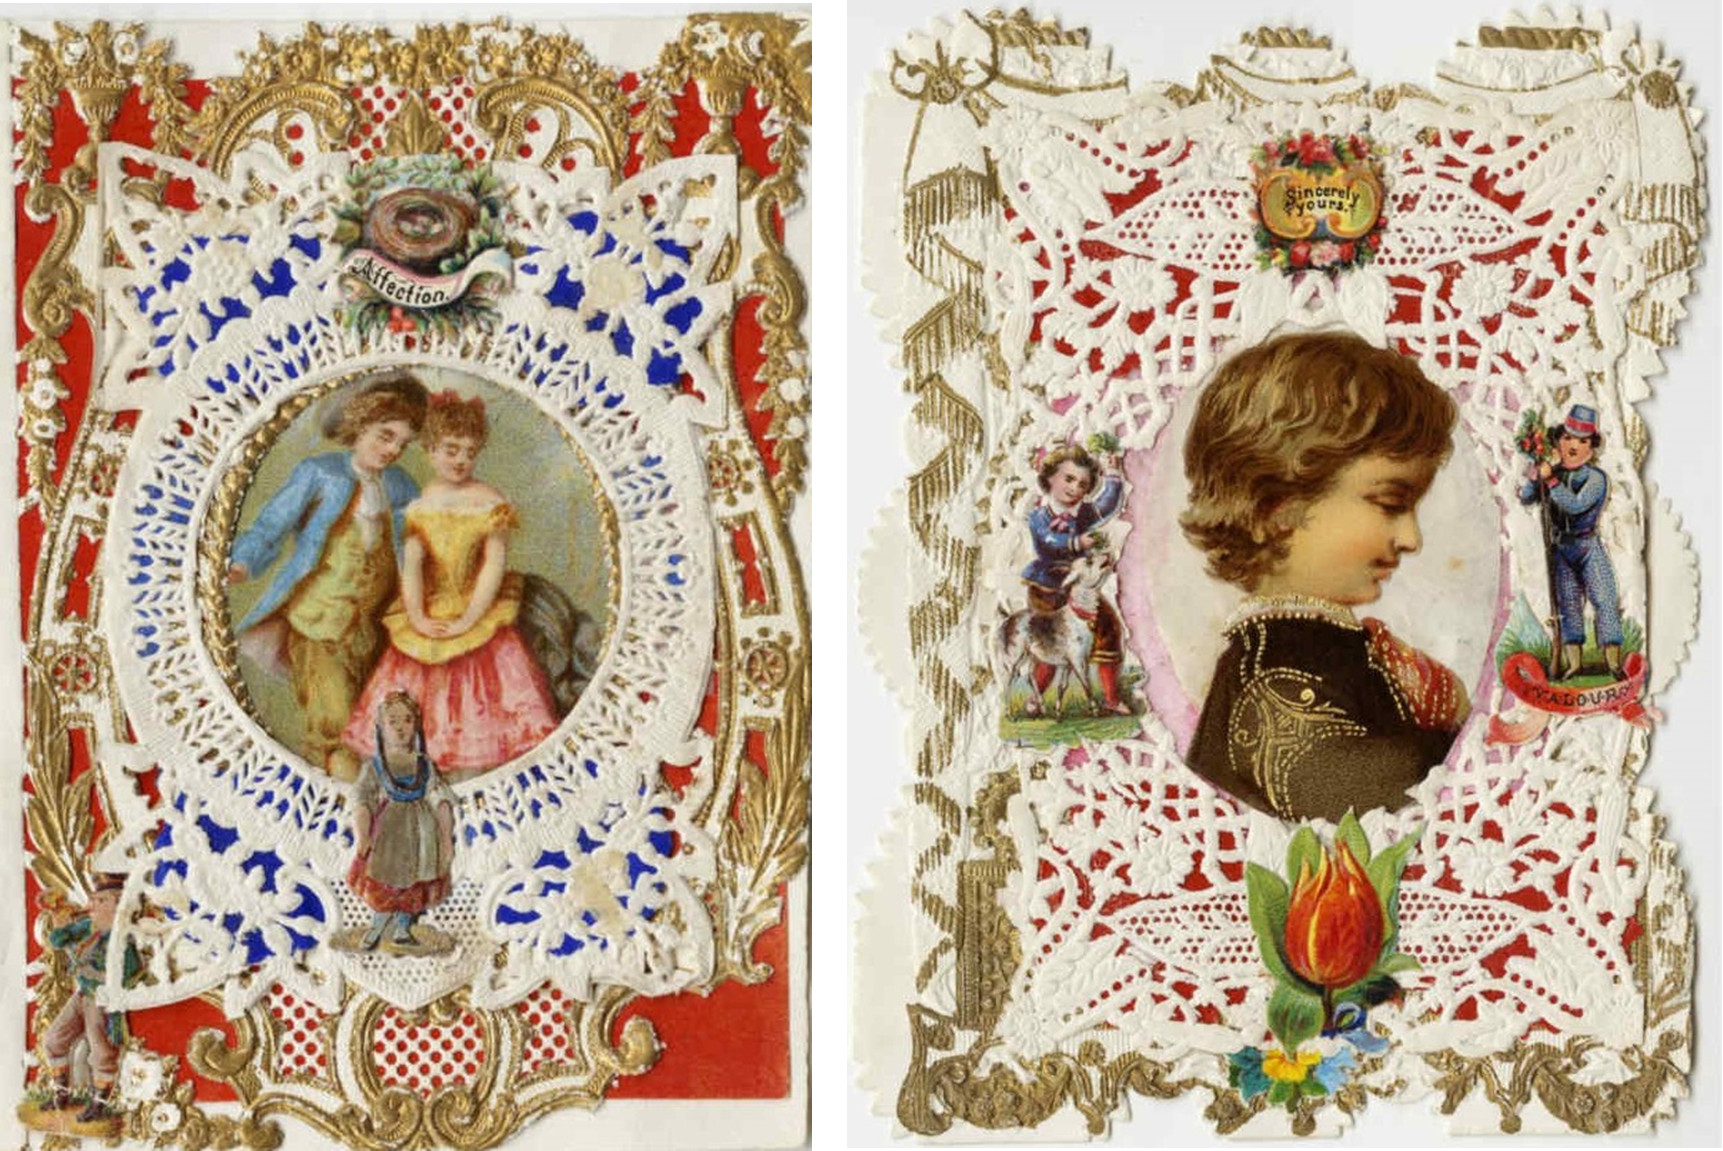 Left: Image of 19th century valentine card. The red paper is embellished with gold embossing and white lace styling. In the center, an illustration of young man and young woman who lean closely together. Printed across the top, the word “Affection.”  Right: Image of 19th century valentine card. The red paper is embellished with gold embossing and white lace styling. In the center, an illustration of the profile of a boy who is flanked by smaller illustrations of a boy feeding a goat (left) and a young soldier (right). Printed across the top, the words “Sincerely Yours.”